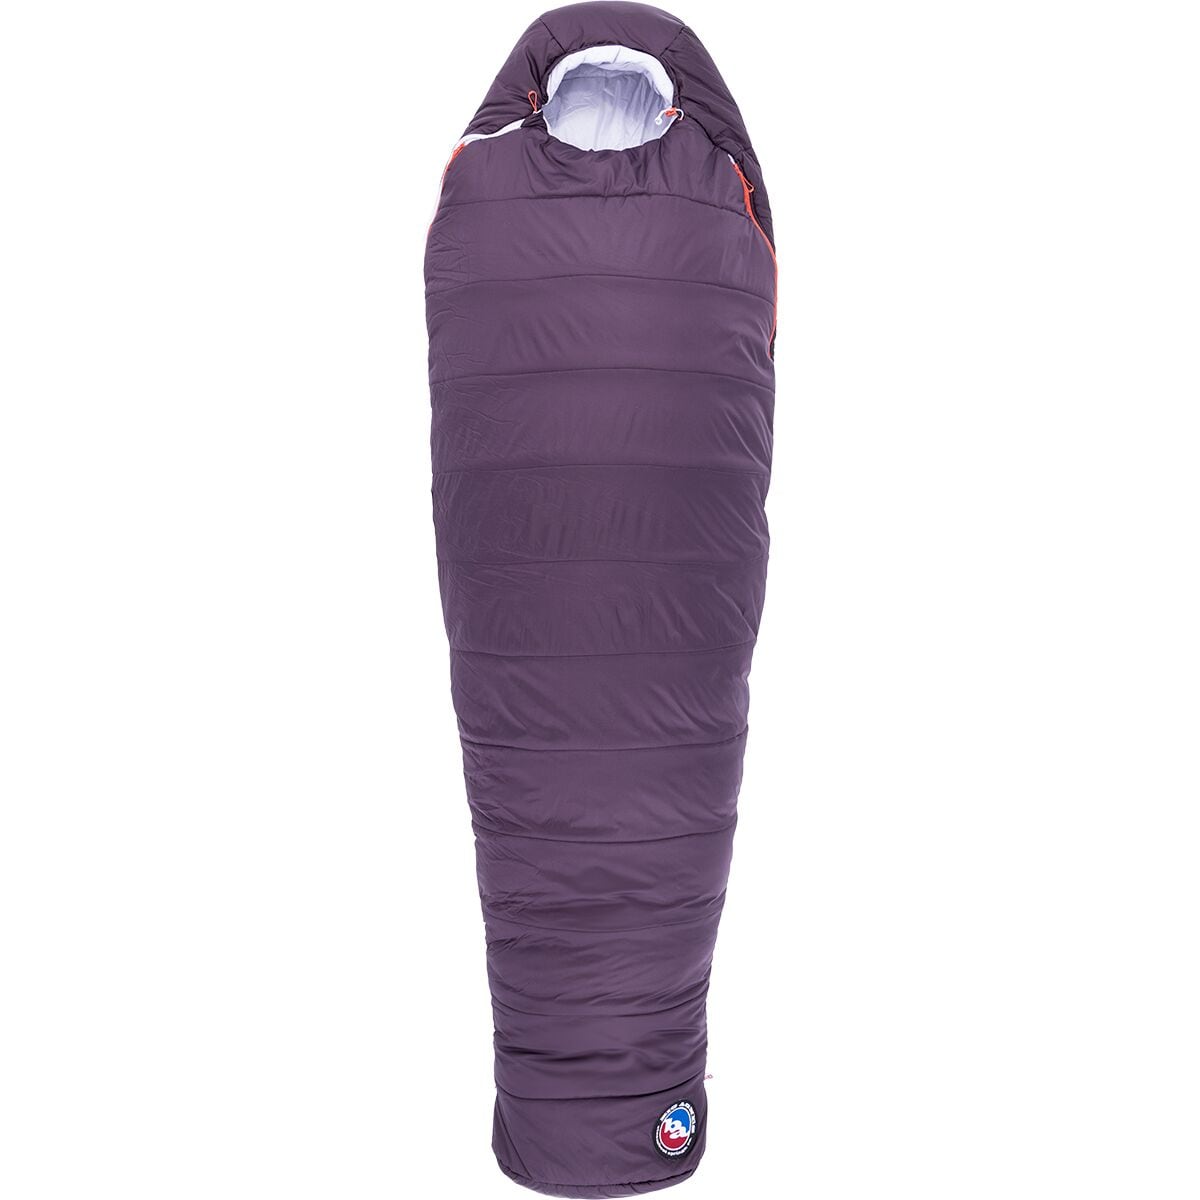 Torchlight Camp Sleeping Bag: 20F Synthetic - Women